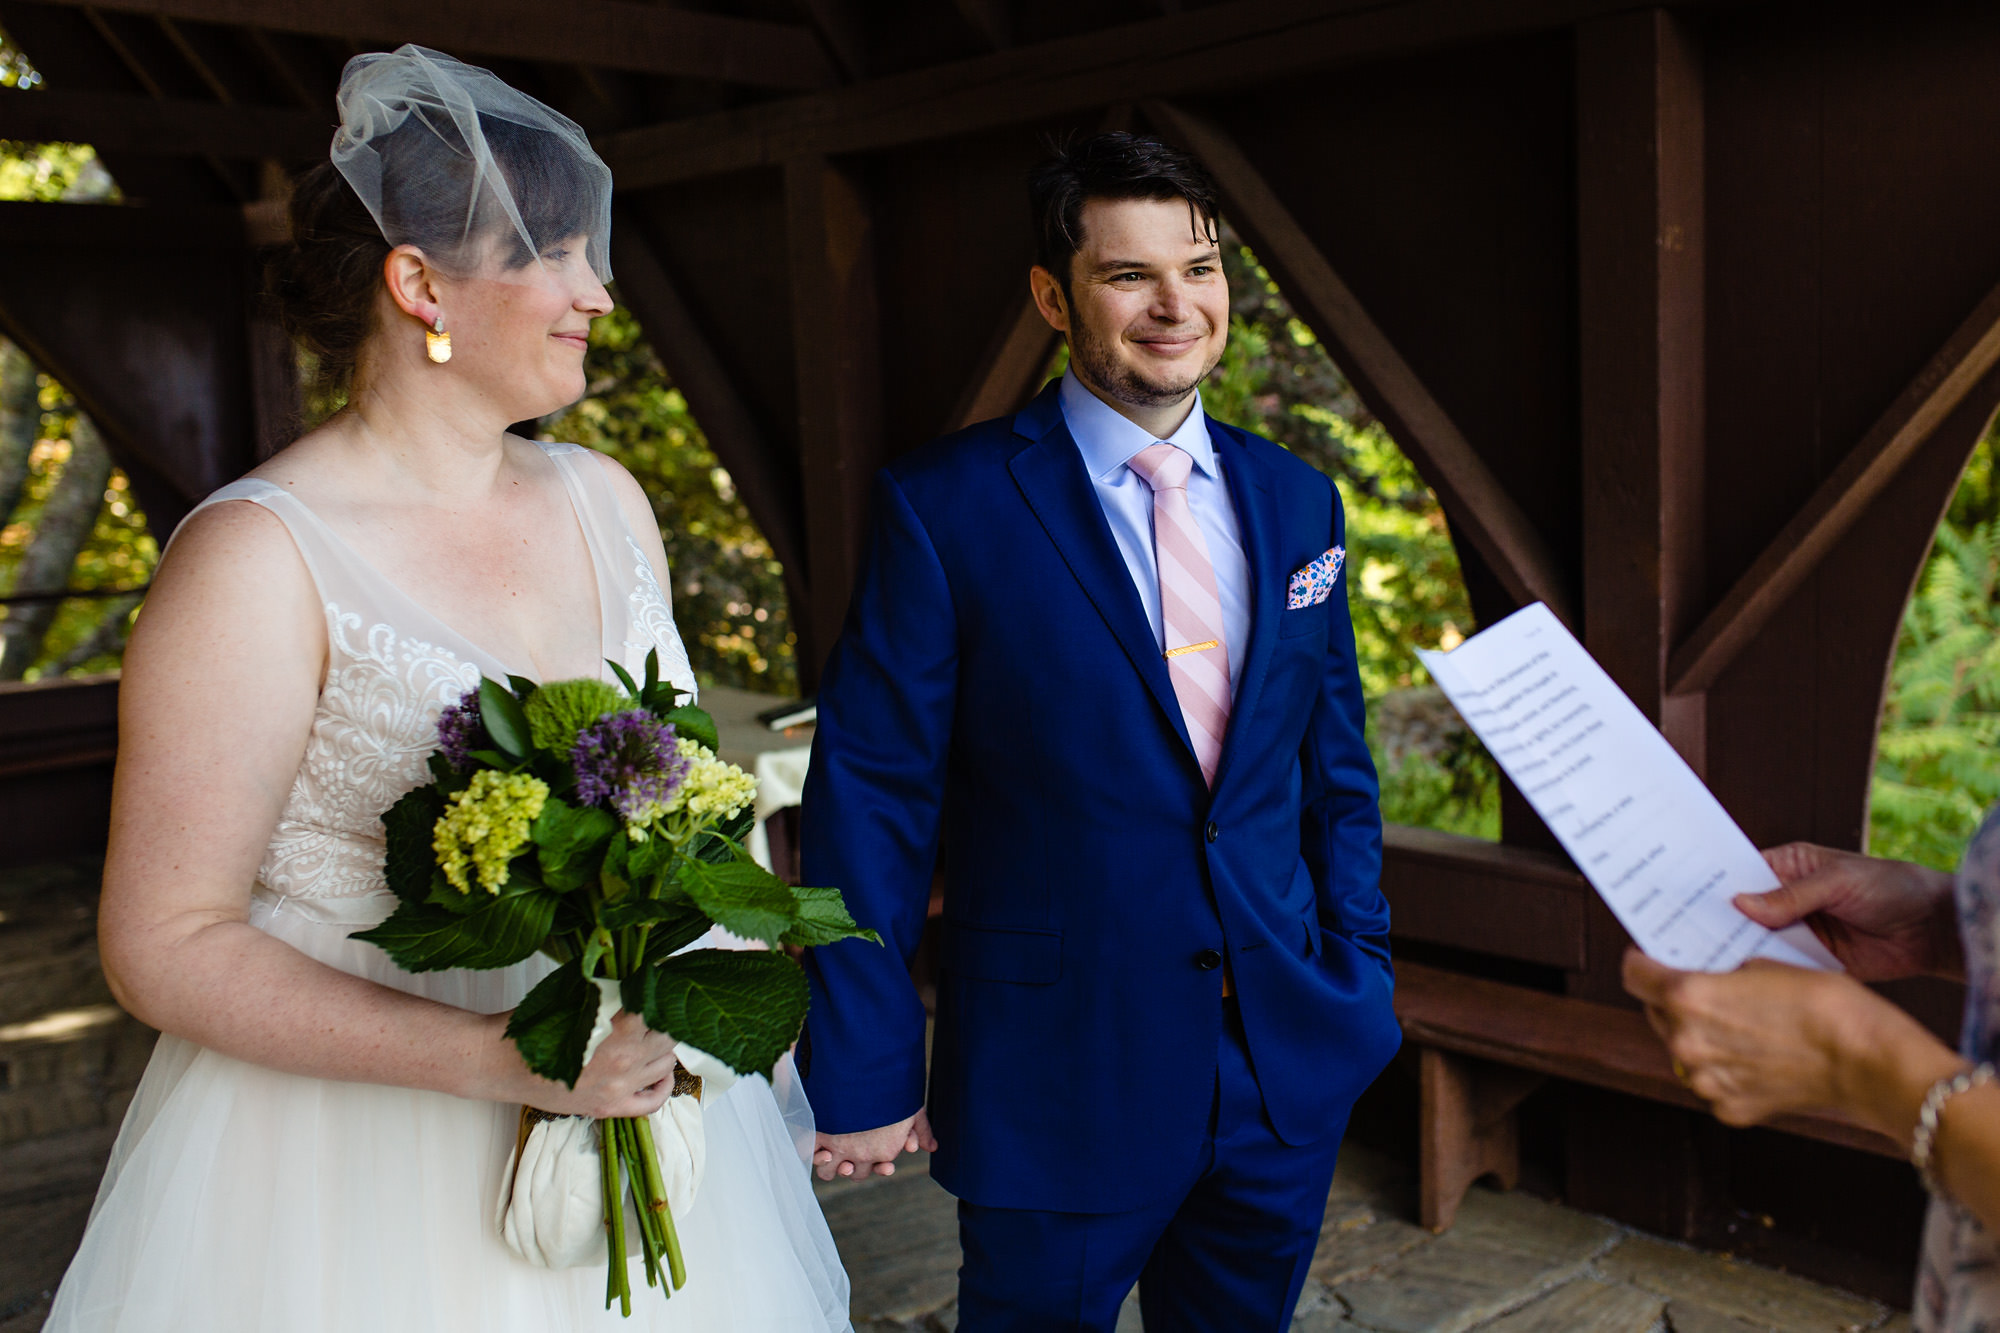 A bride and groom elope at the Vesper Hill Children's Chapel in Rockport, Maine